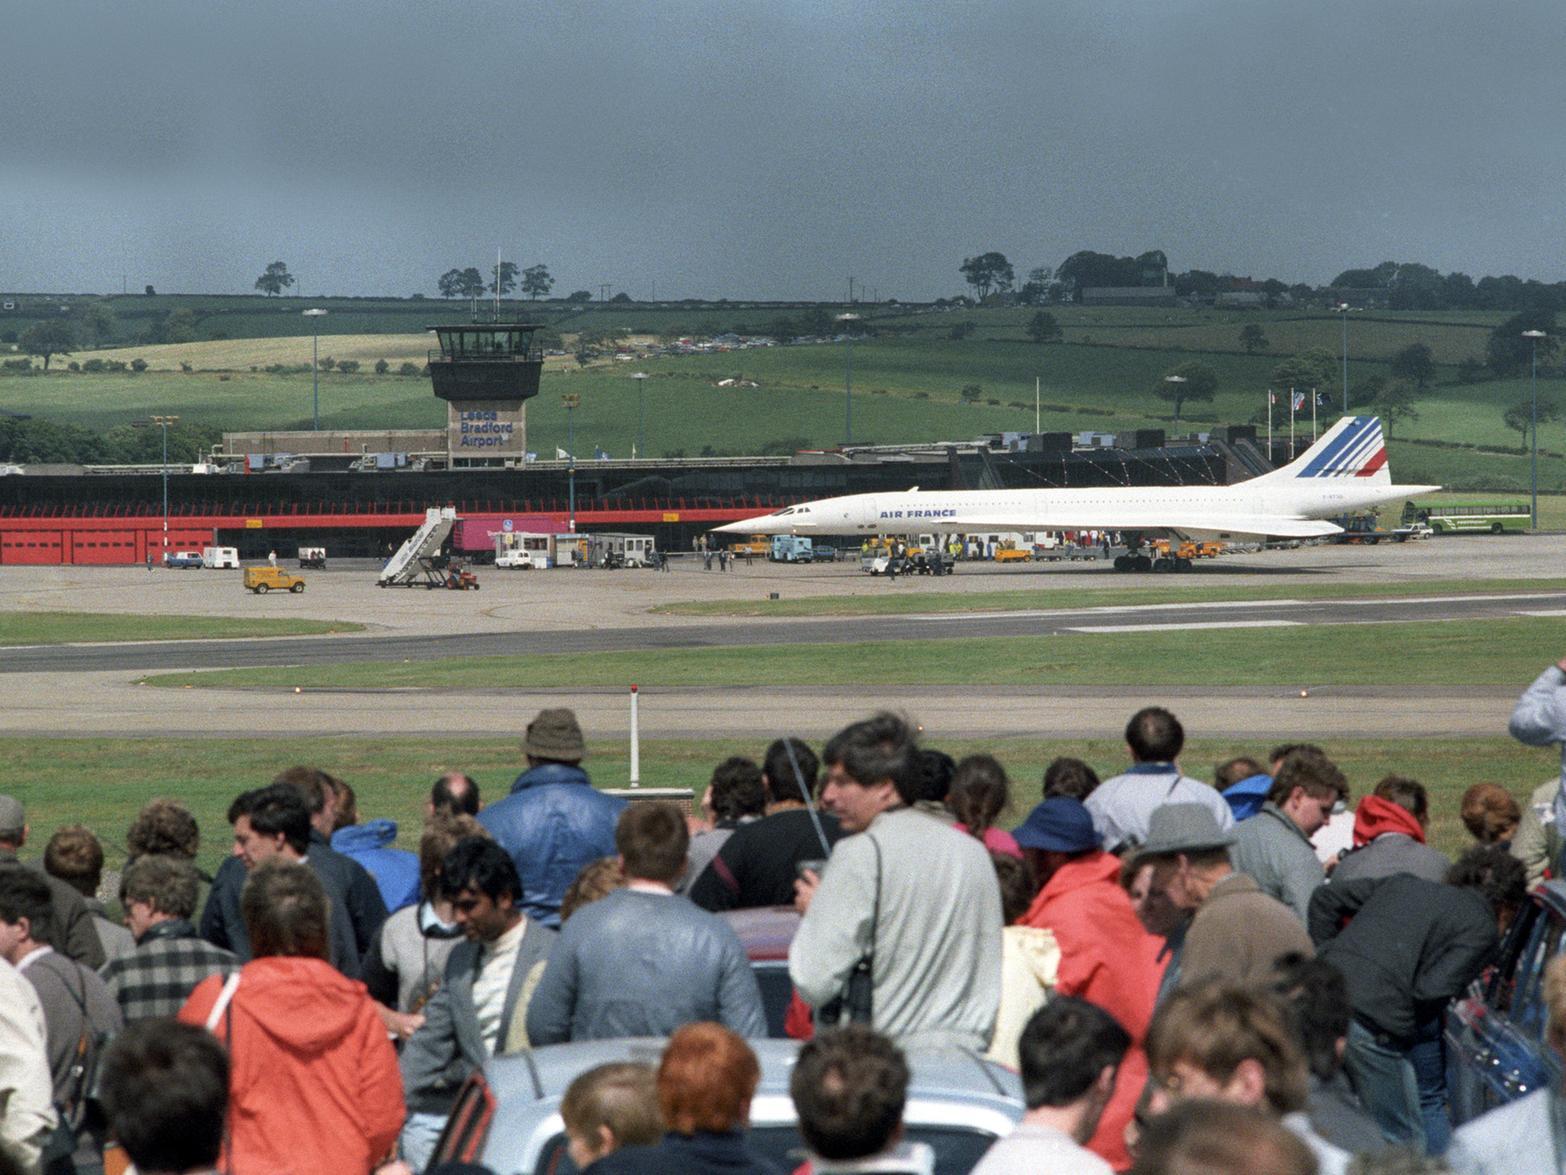 Air France Concorde touches down at Leeds Bradford Airport. Were you among the crowds?